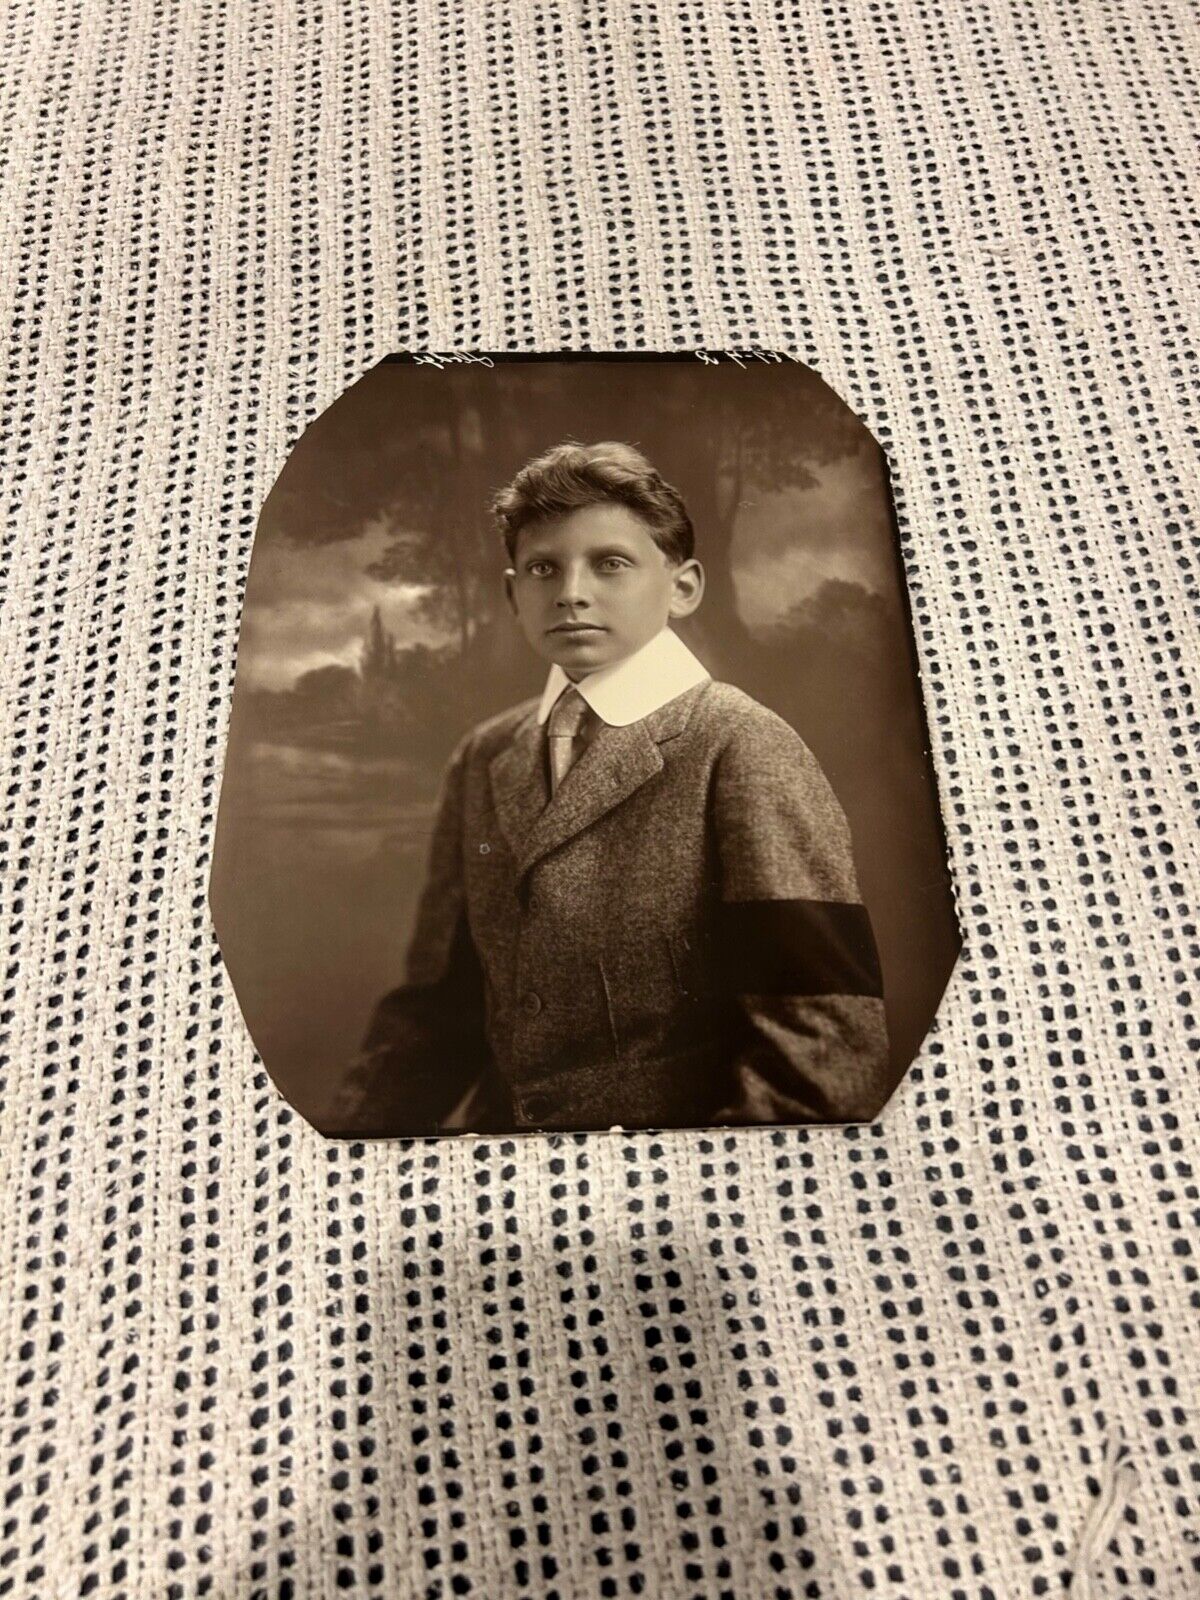 Old Photograph - early 1900s - portrait from 1920 - signed on back